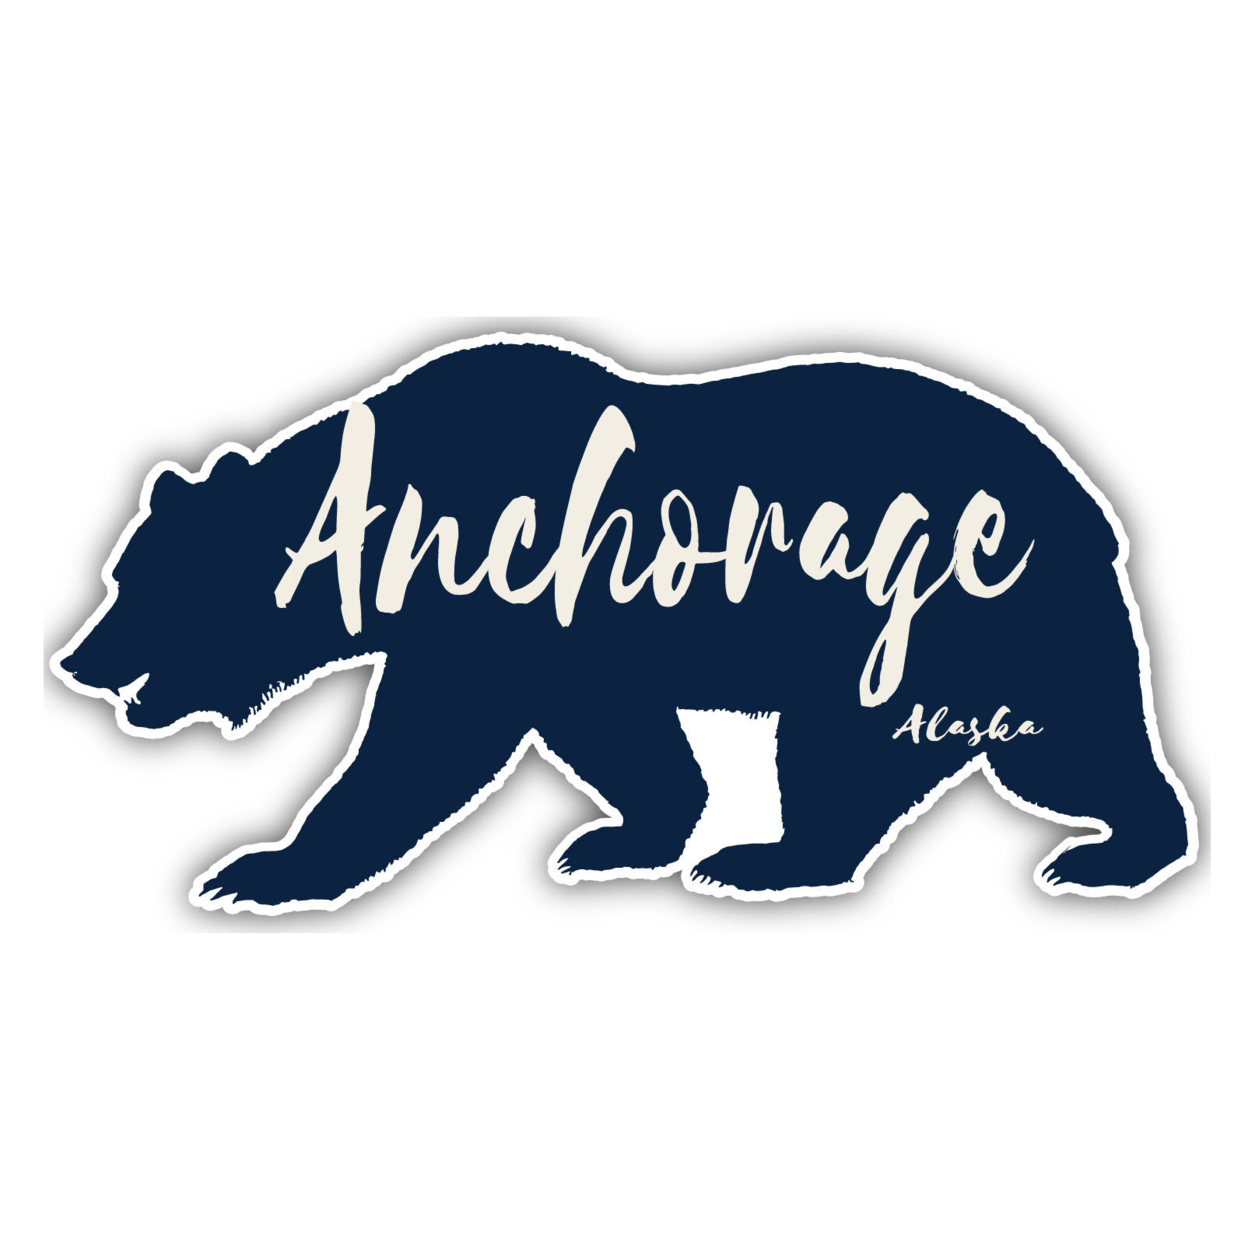 Anchorage Alaska Souvenir Decorative Stickers (Choose Theme And Size) - Single Unit, 12-Inch, Great Outdoors